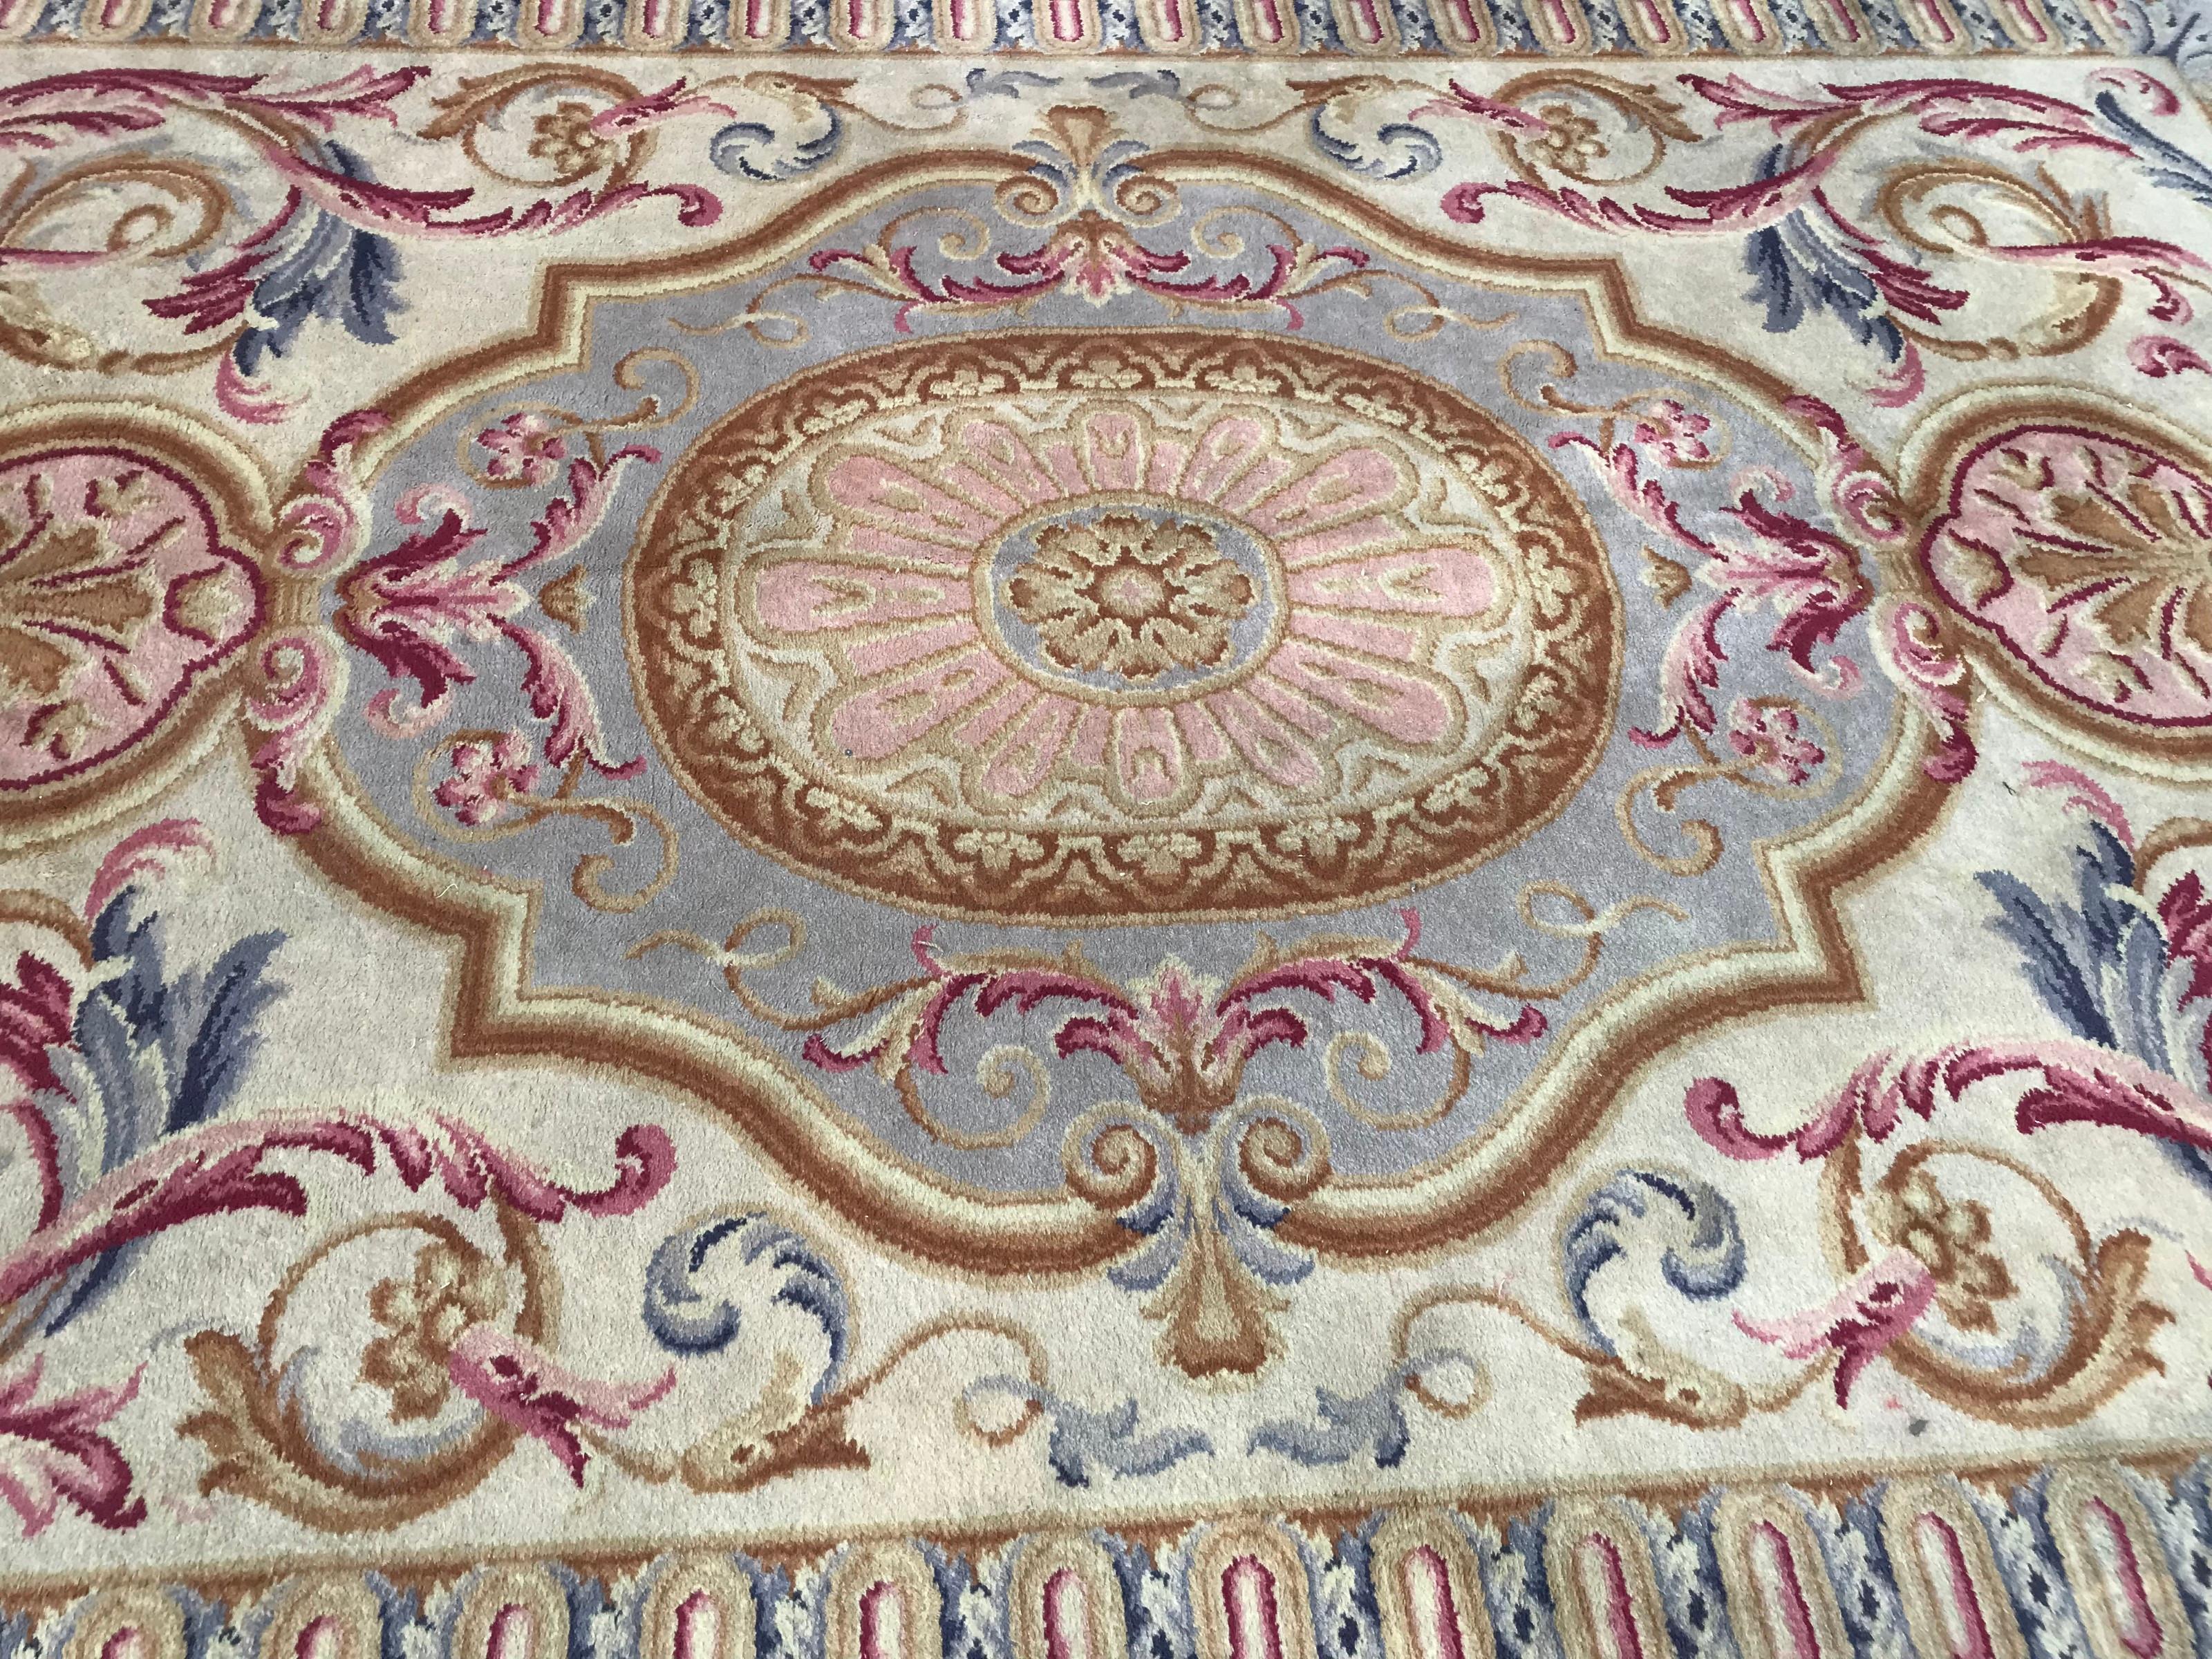 20th Century Midcentury Knotted Aubusson Savonnerie Design Rug